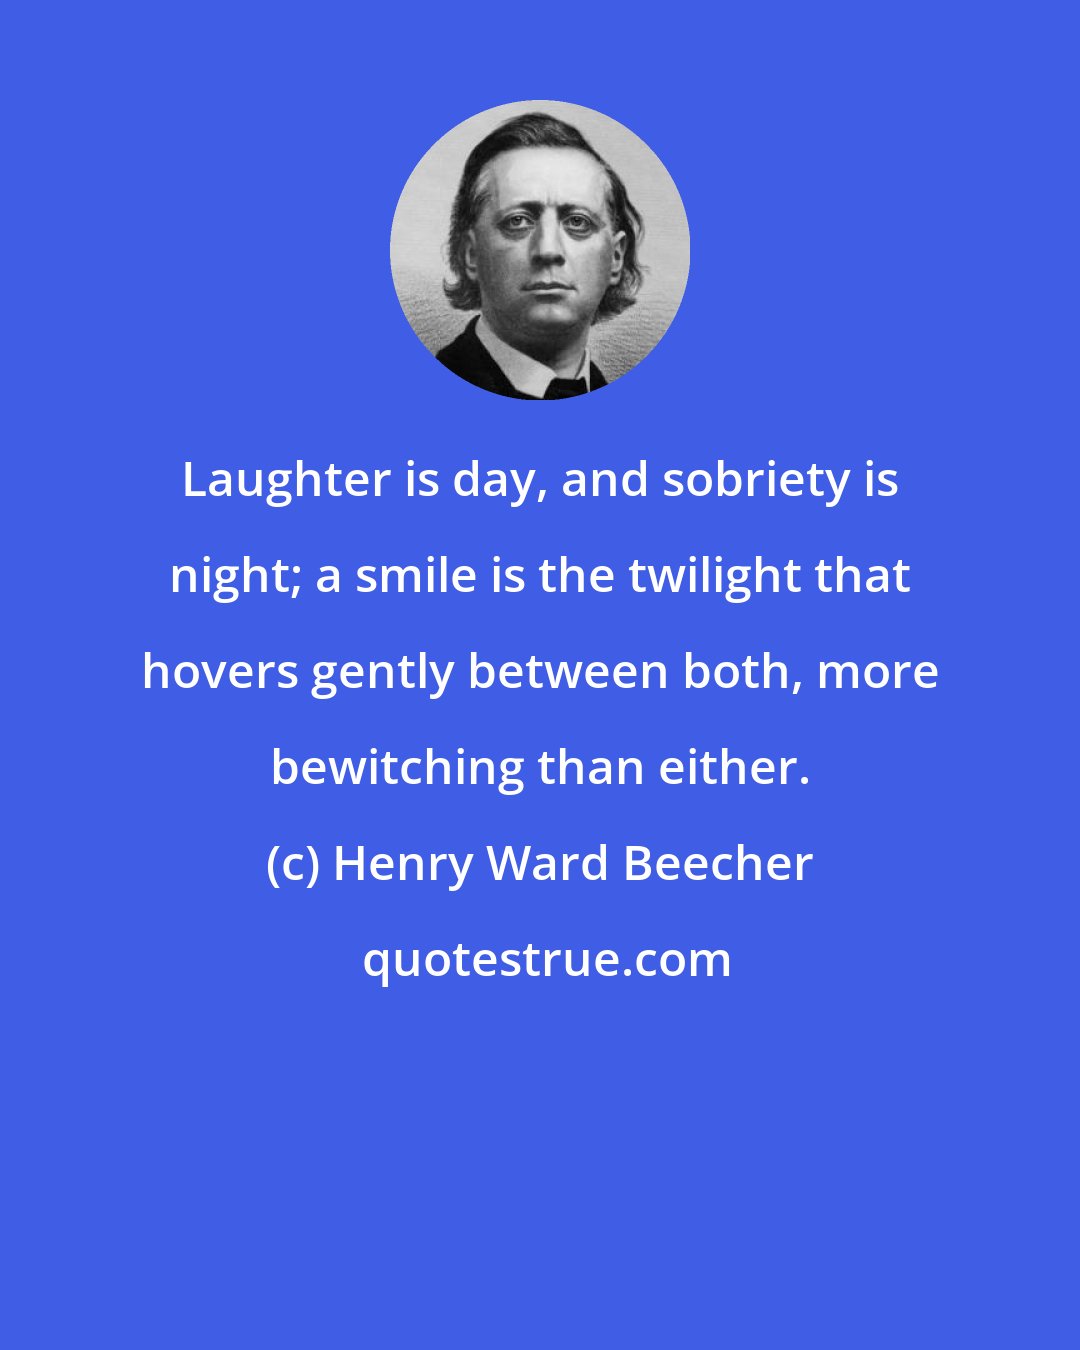 Henry Ward Beecher: Laughter is day, and sobriety is night; a smile is the twilight that hovers gently between both, more bewitching than either.